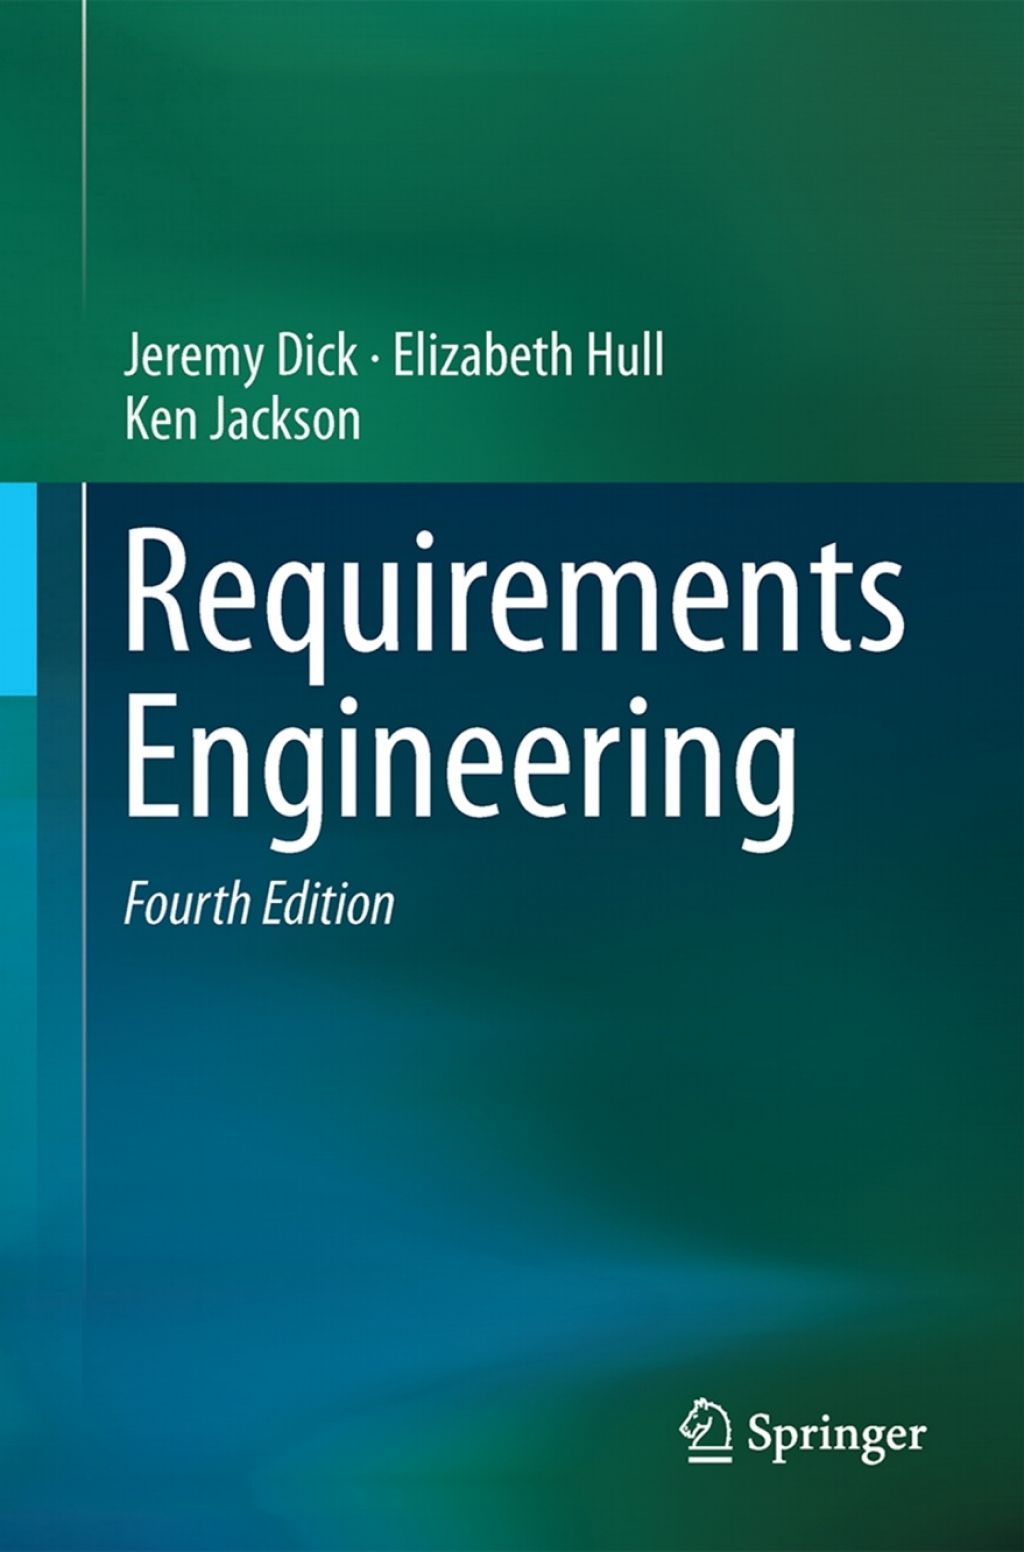 Requirements Engineering - 4th Edition (eBook Rental)